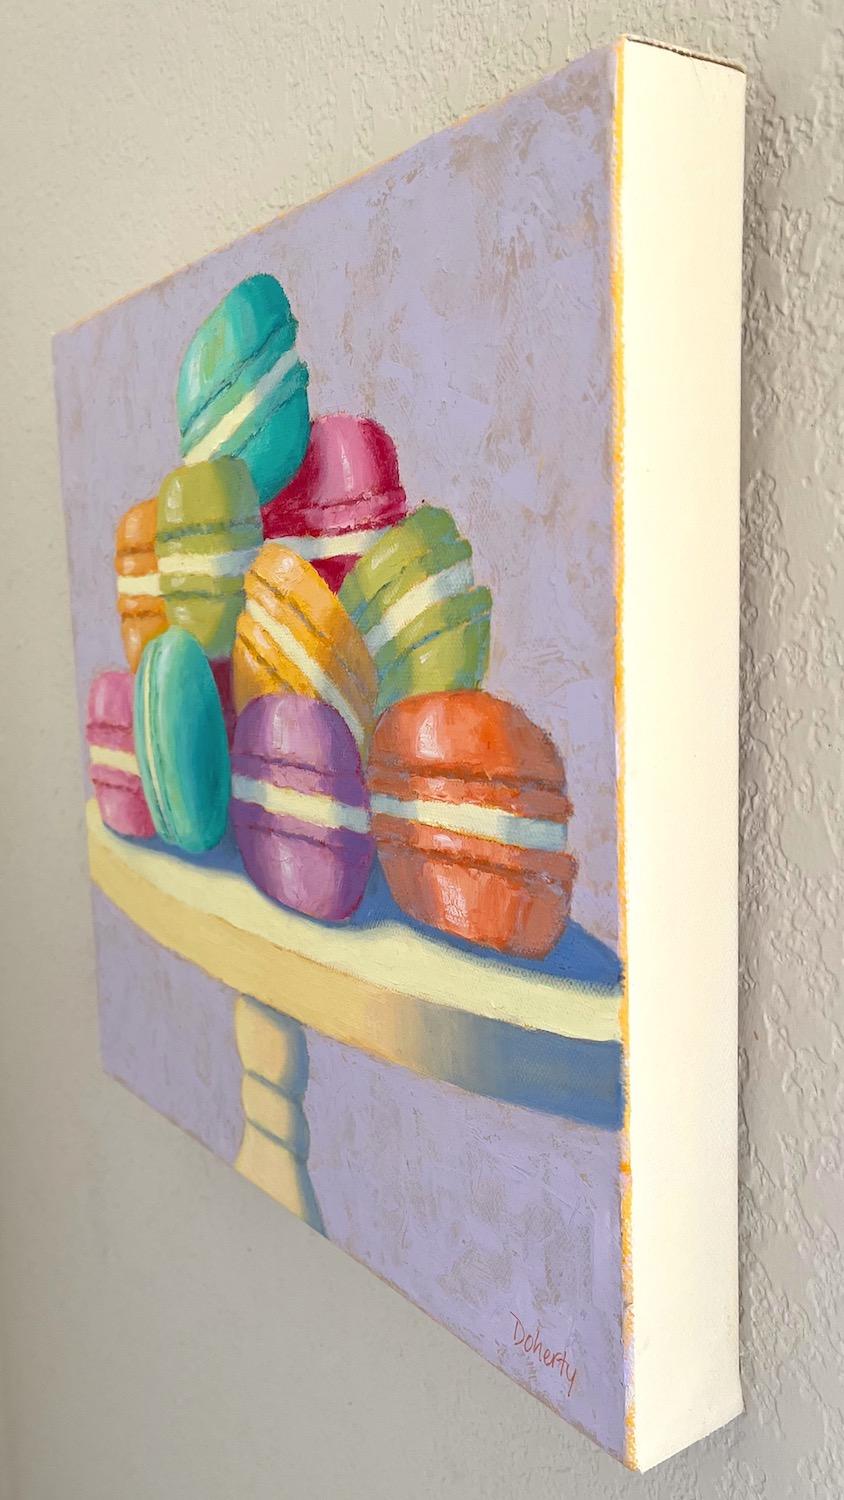 <p>Artist Comments<br />A luscious assortment of colorful French macarons rests on a white pedestal plate. Artist Pat Doherty balances the elements in the composition, establishing harmonious color relationships between light and shadow. The purple